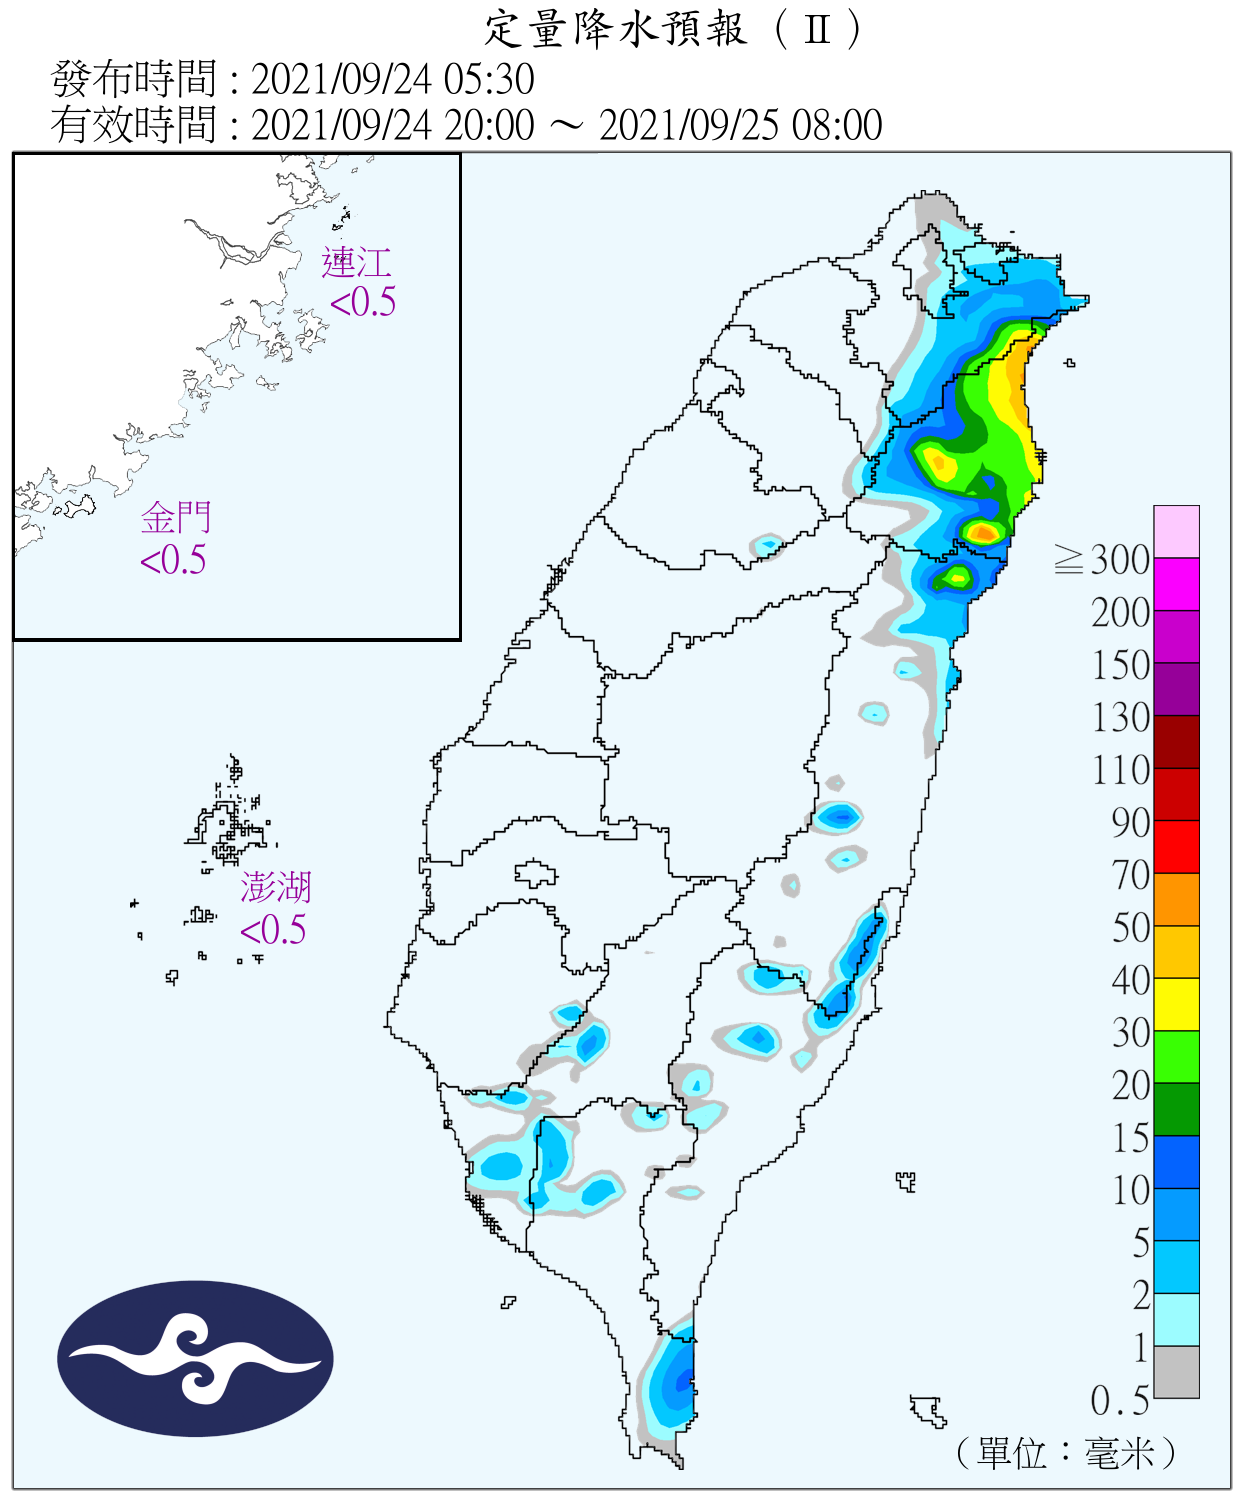 Rainfall forecast from tonight to tomorrow morning.  (Photo/Central Meteorological Bureau) The first northeasterly wind in autumn!  4 Areas with rain turning cooler, "Dandelion" may turn into a strong platform